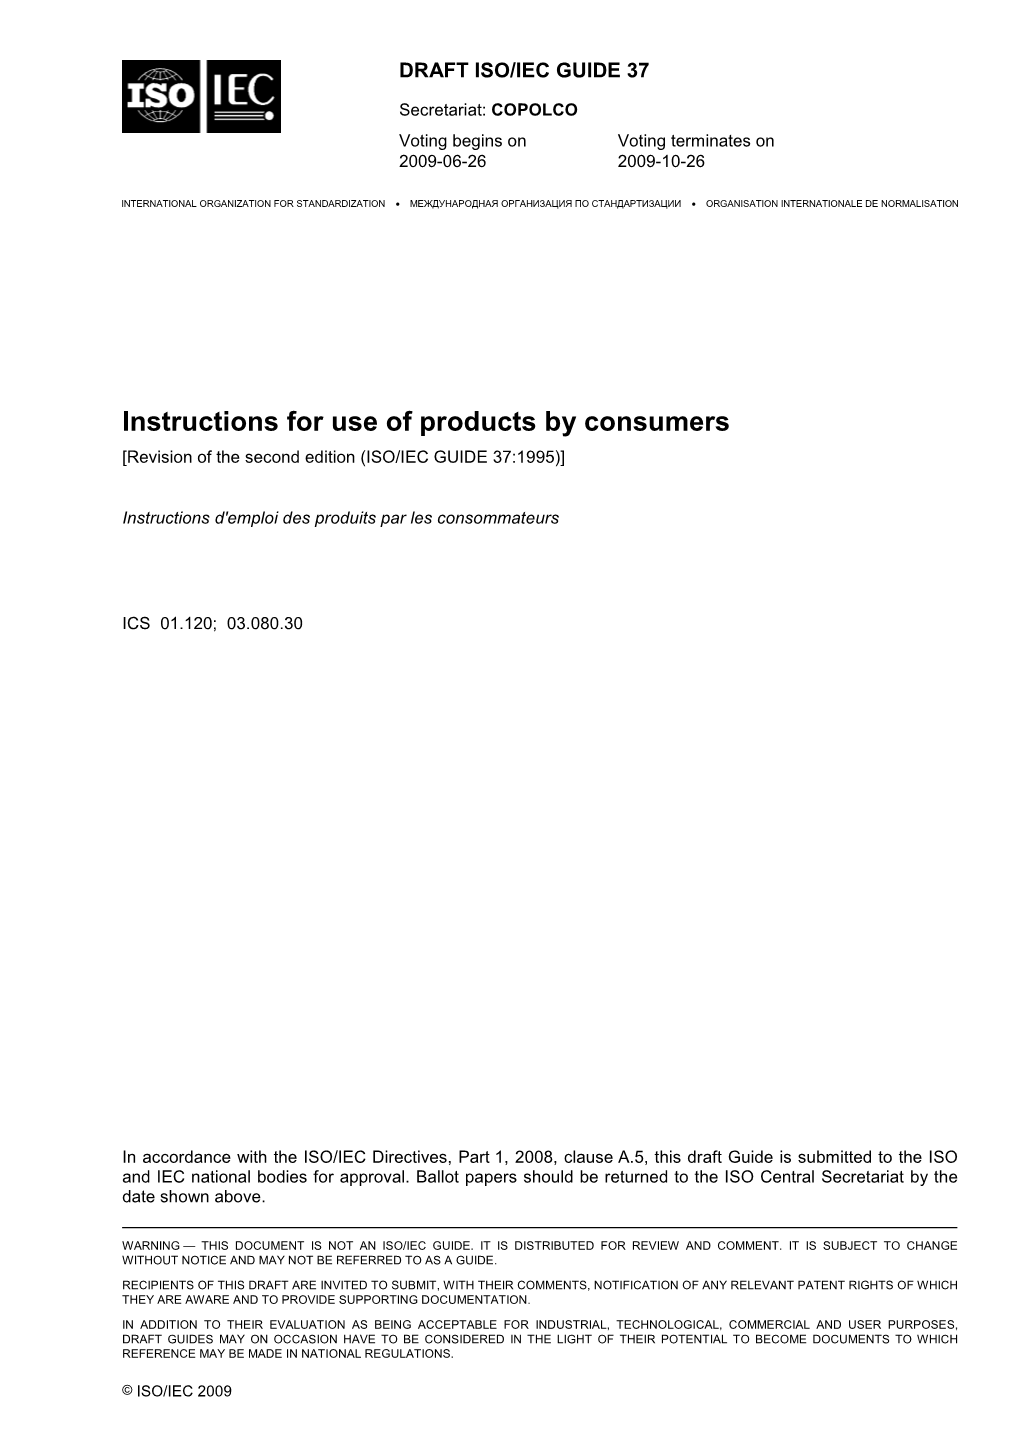 Instructions for Use of Products by Consumers [Revision of the Second Edition (ISO/IEC GUIDE 37:1995)]